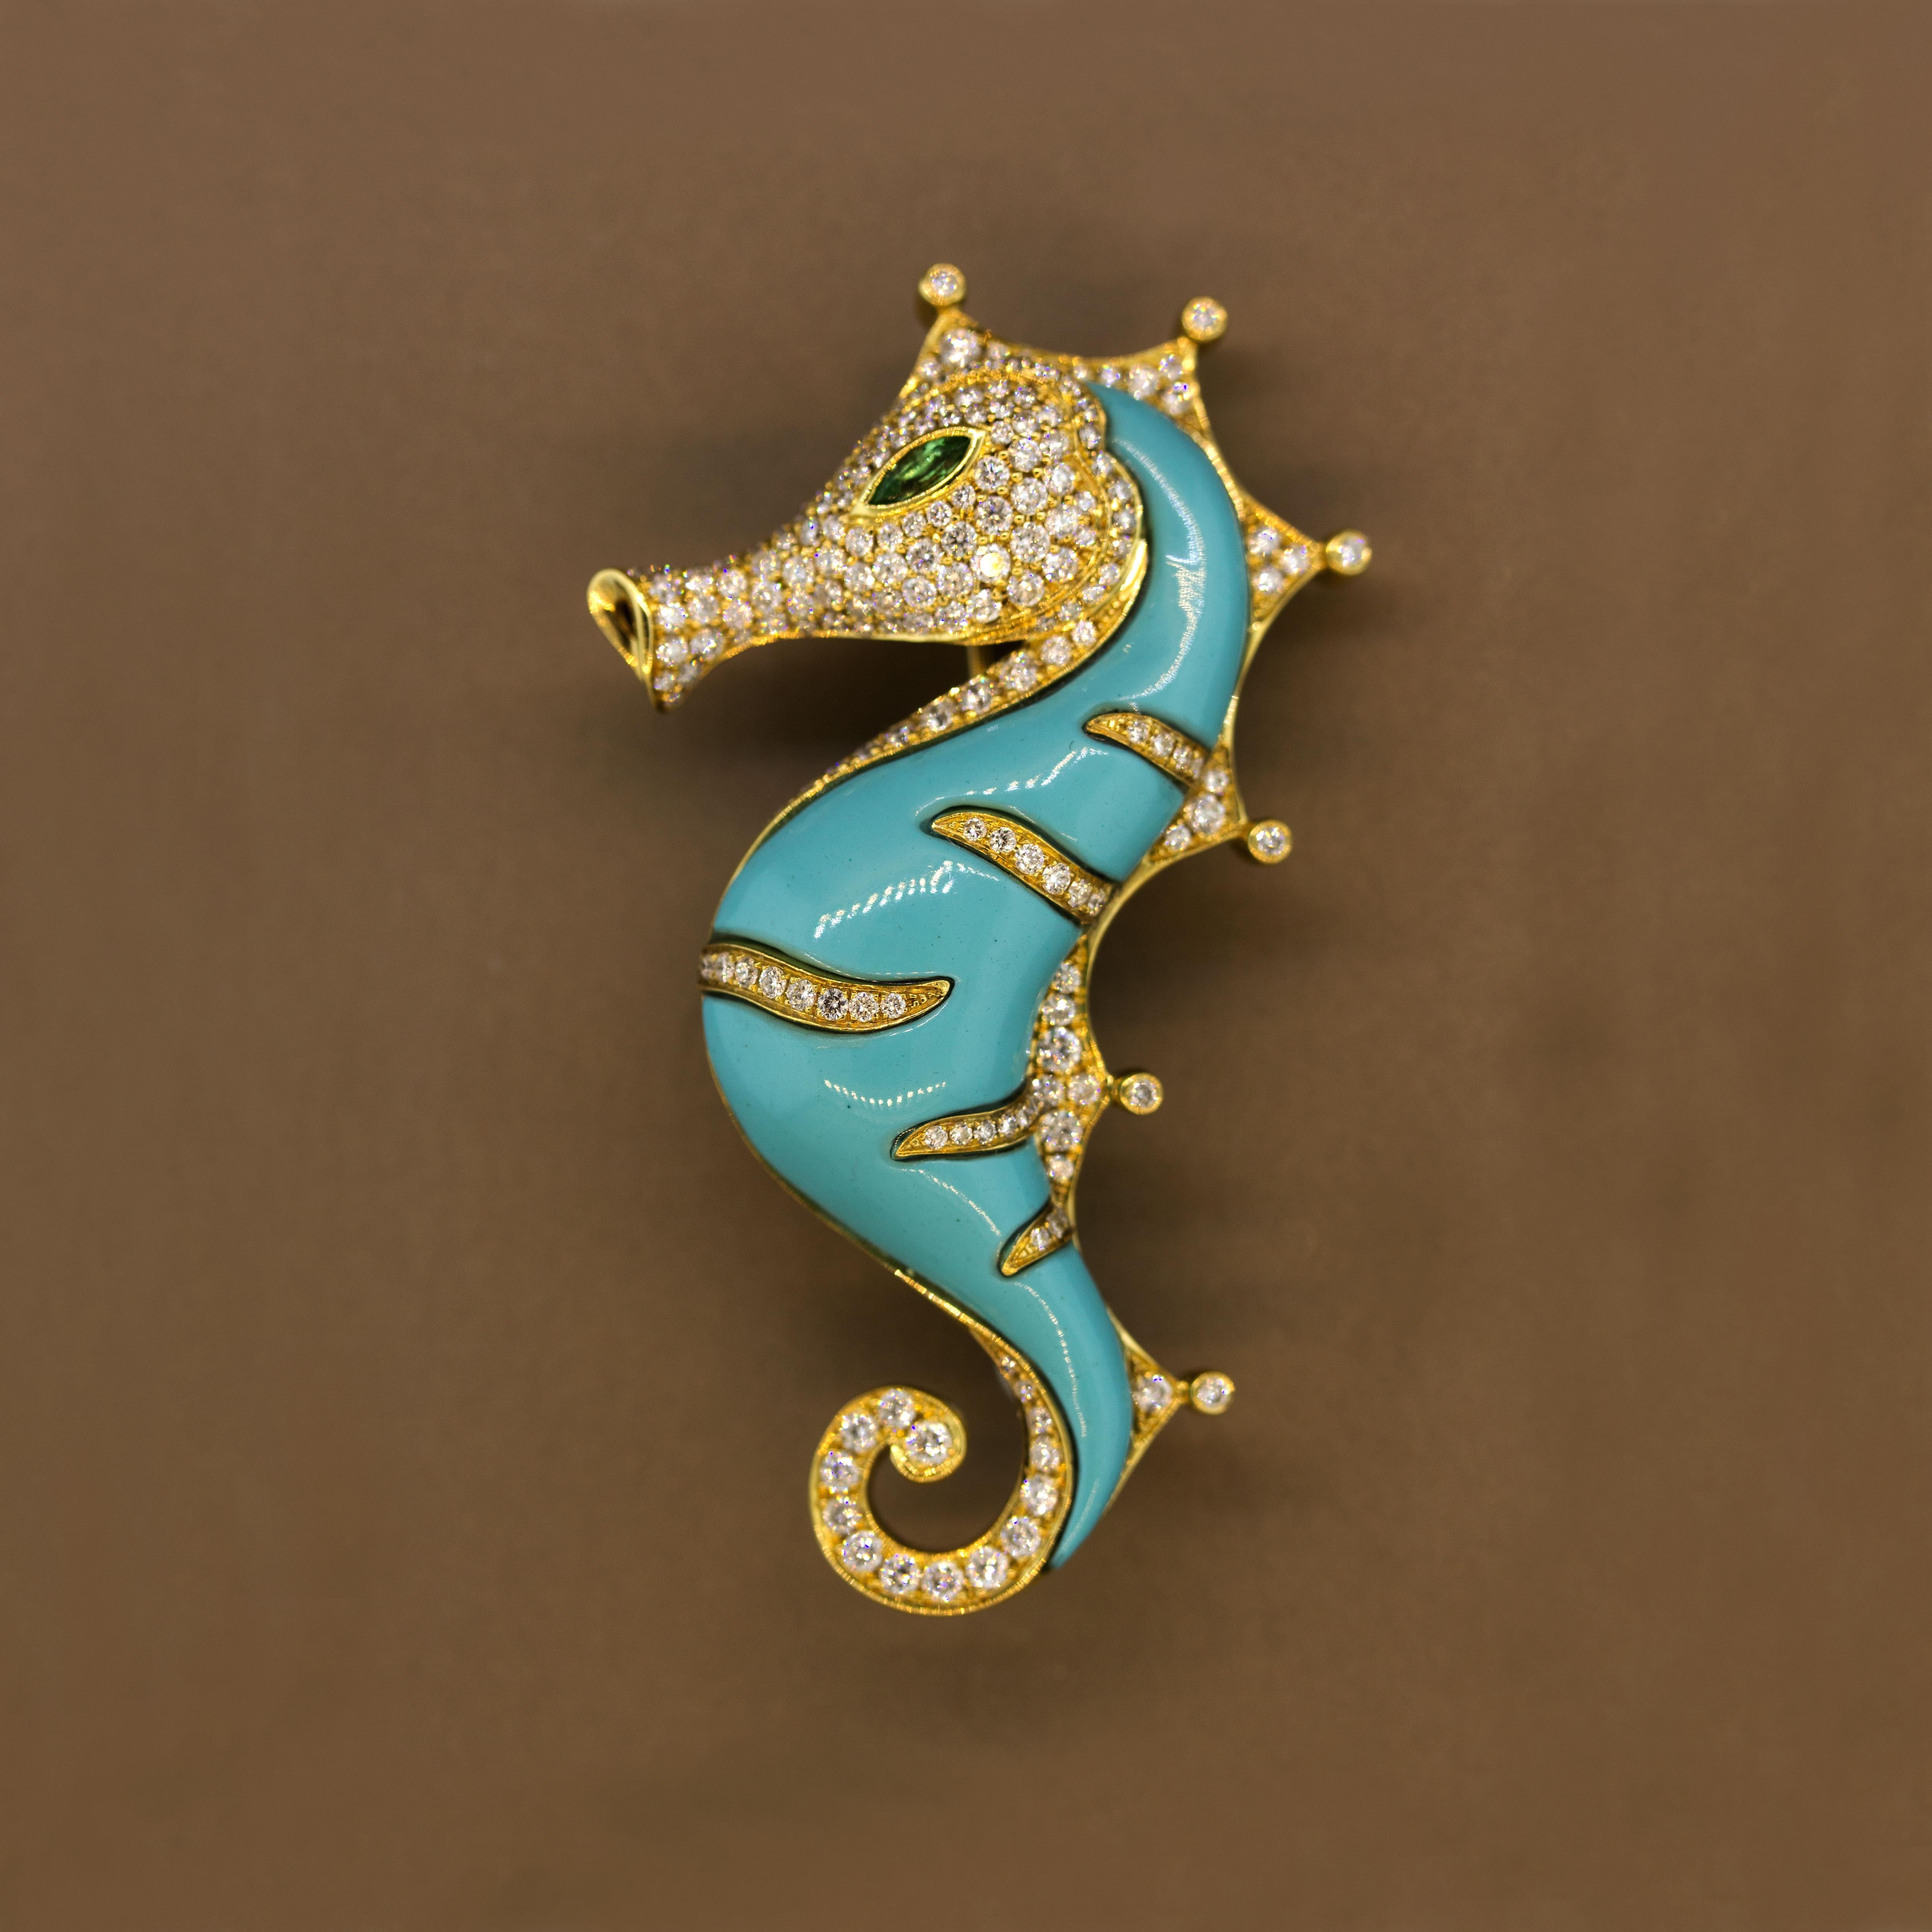 A stunning and realistic seahorse brooch! It features 1.59 carats of round brilliant cut diamonds which accent the seahorse. Its body is made of a bright hand carved greenish-blue turquoise which matches its natural shape. It has a peridot eye